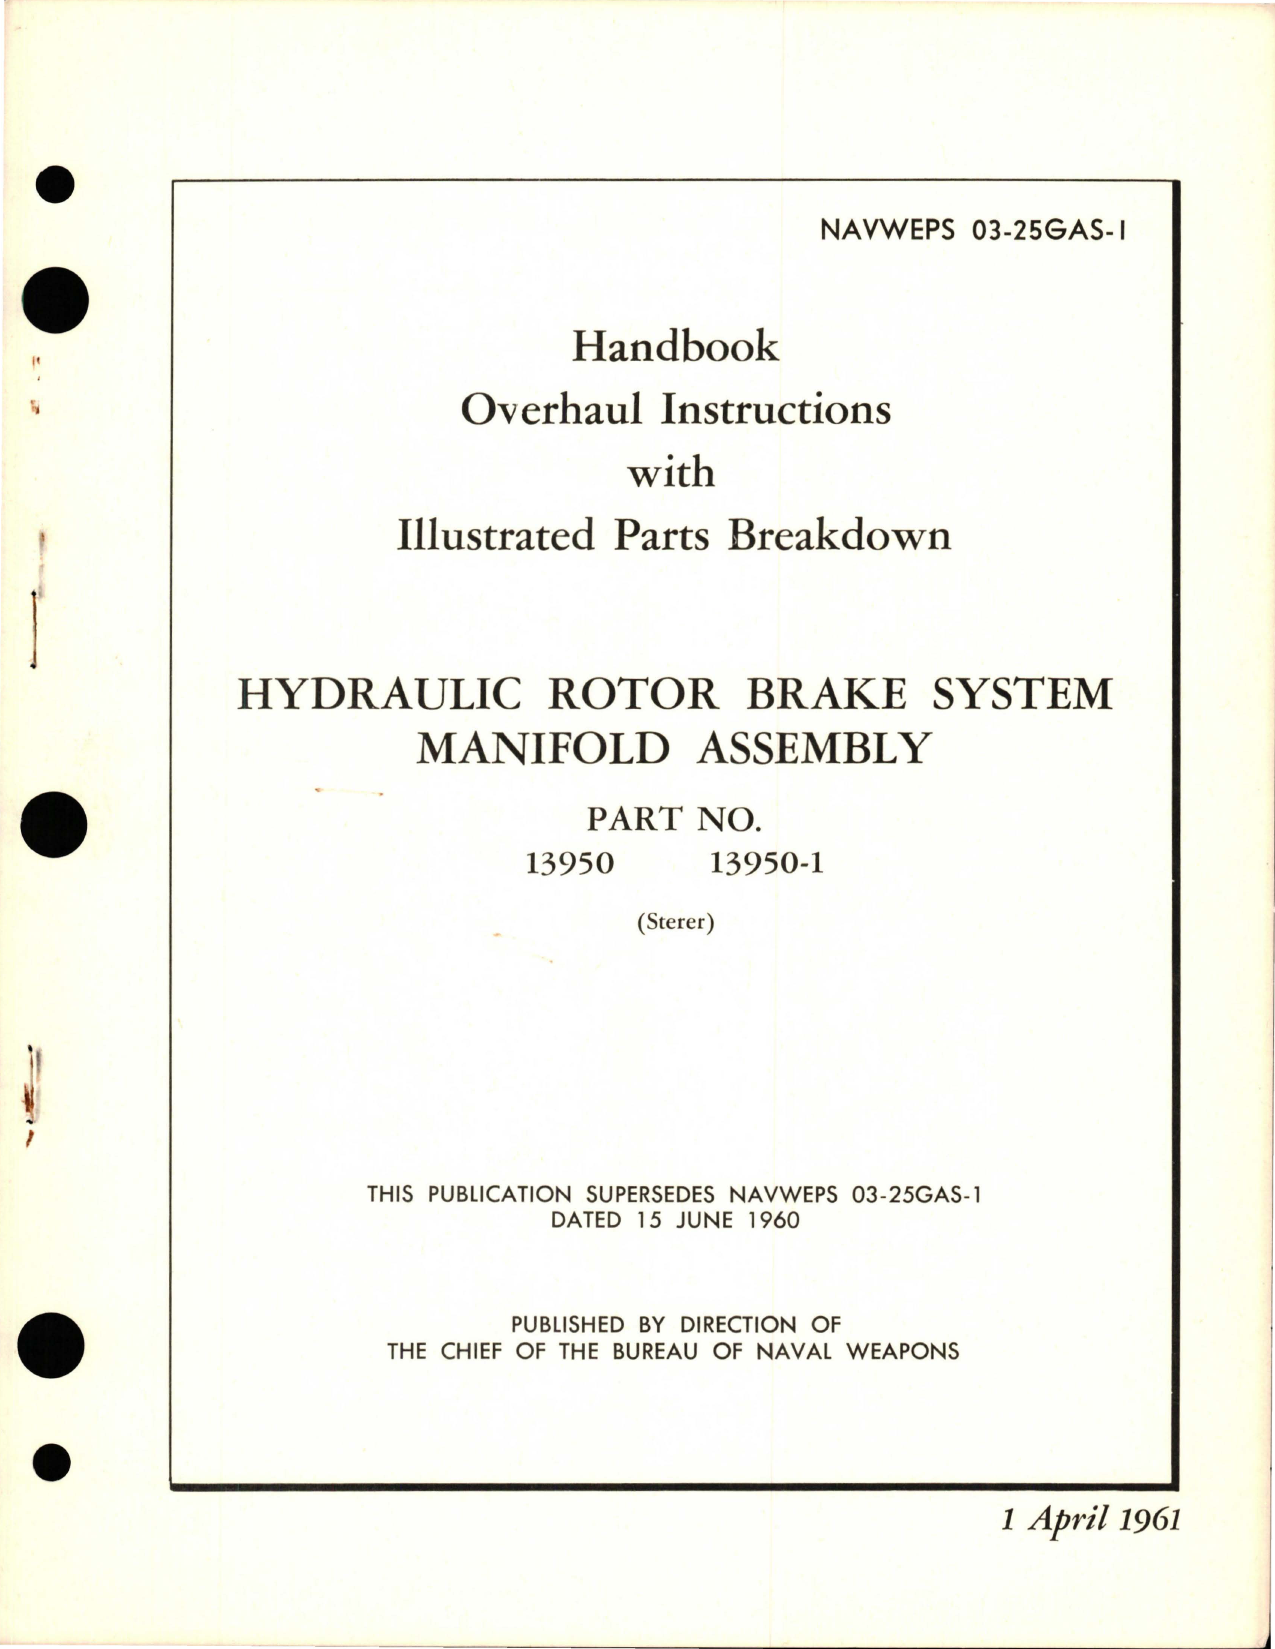 Sample page 1 from AirCorps Library document: Overhaul Instructions with Illustrated Parts Breakdown for Hydraulic Rotor Brake System Manifold Assembly - Part 13950 and 13950-1